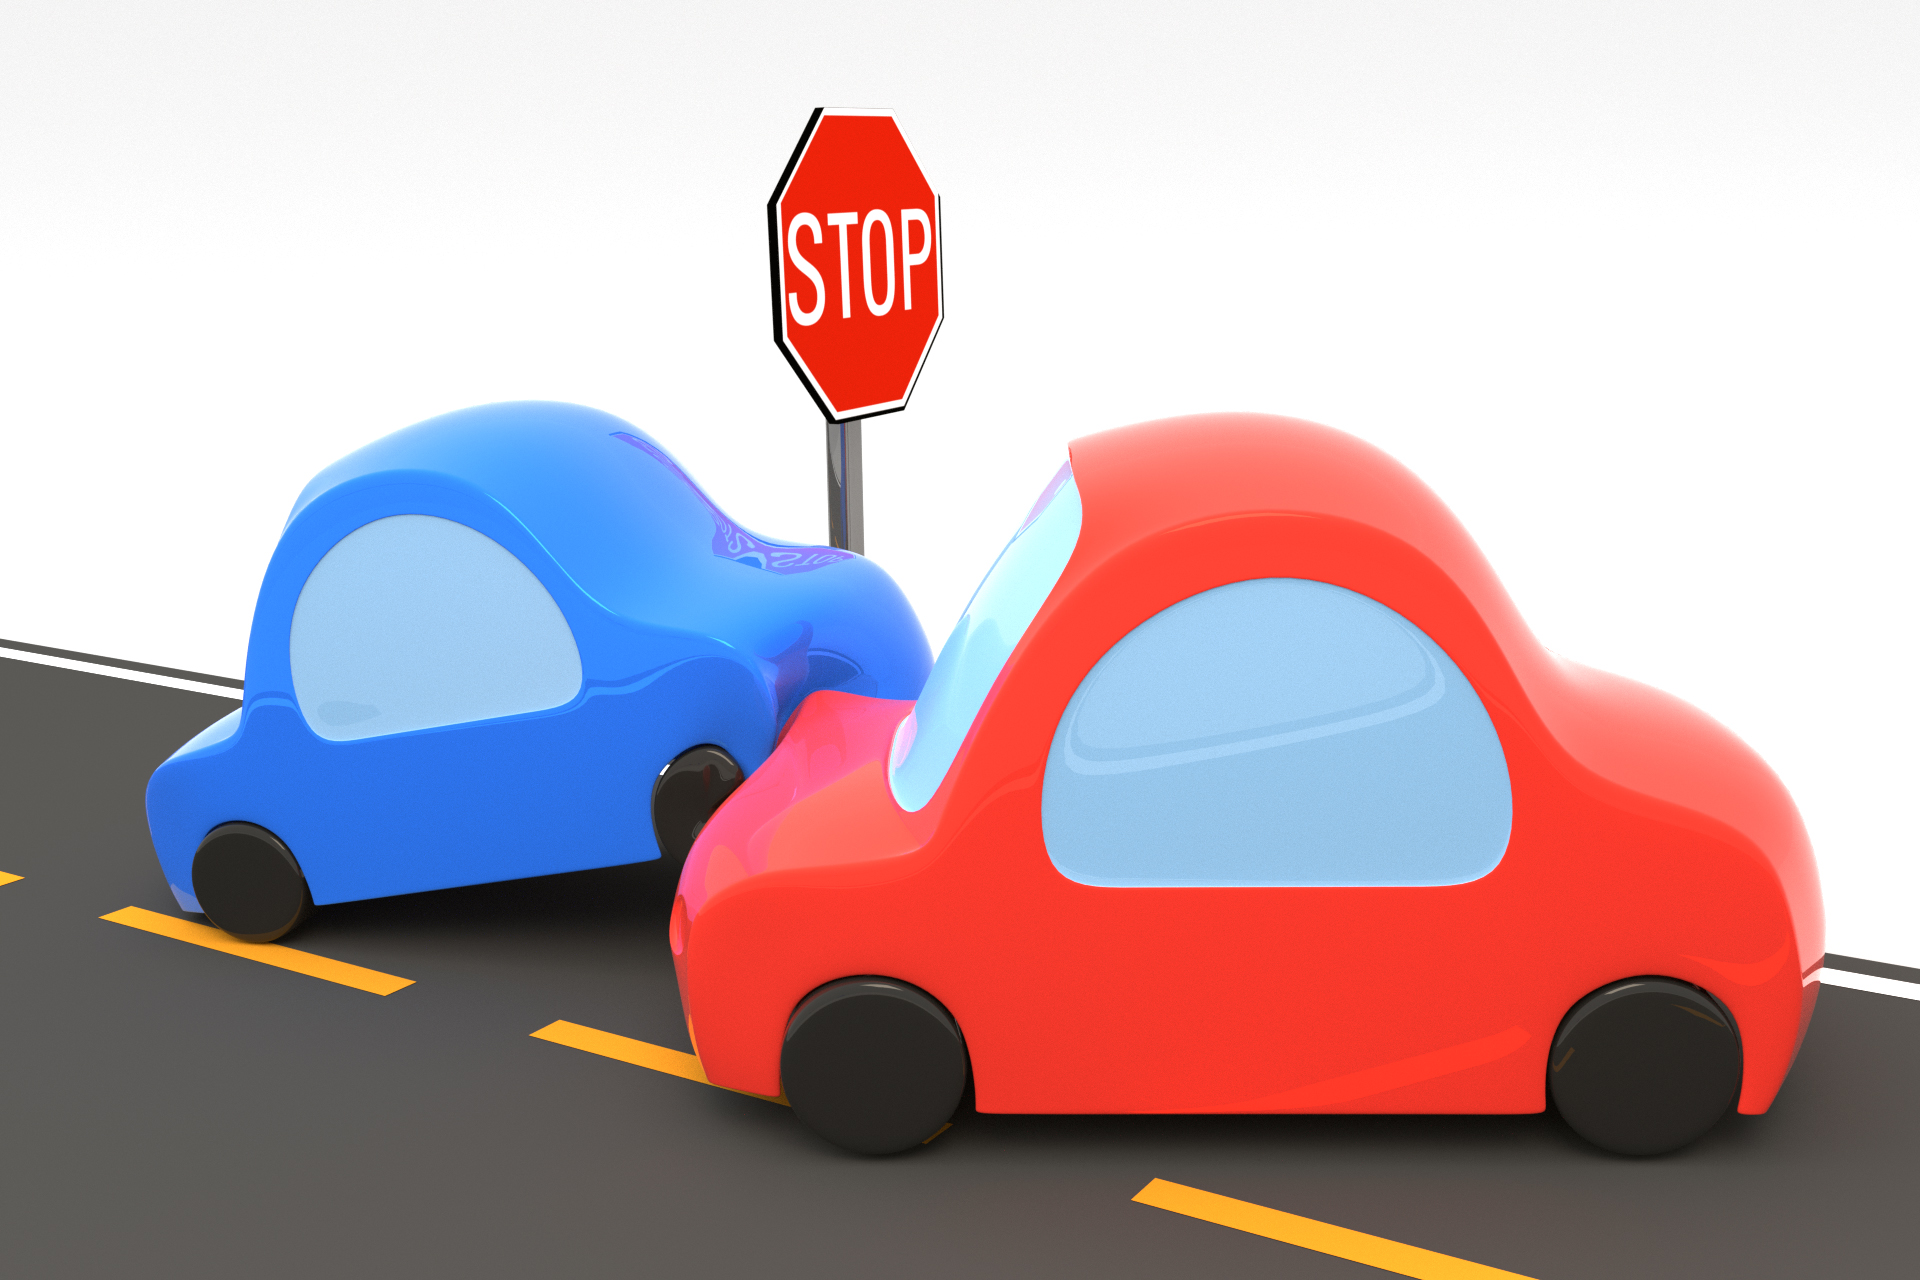 3D image of stop sign collision free image download